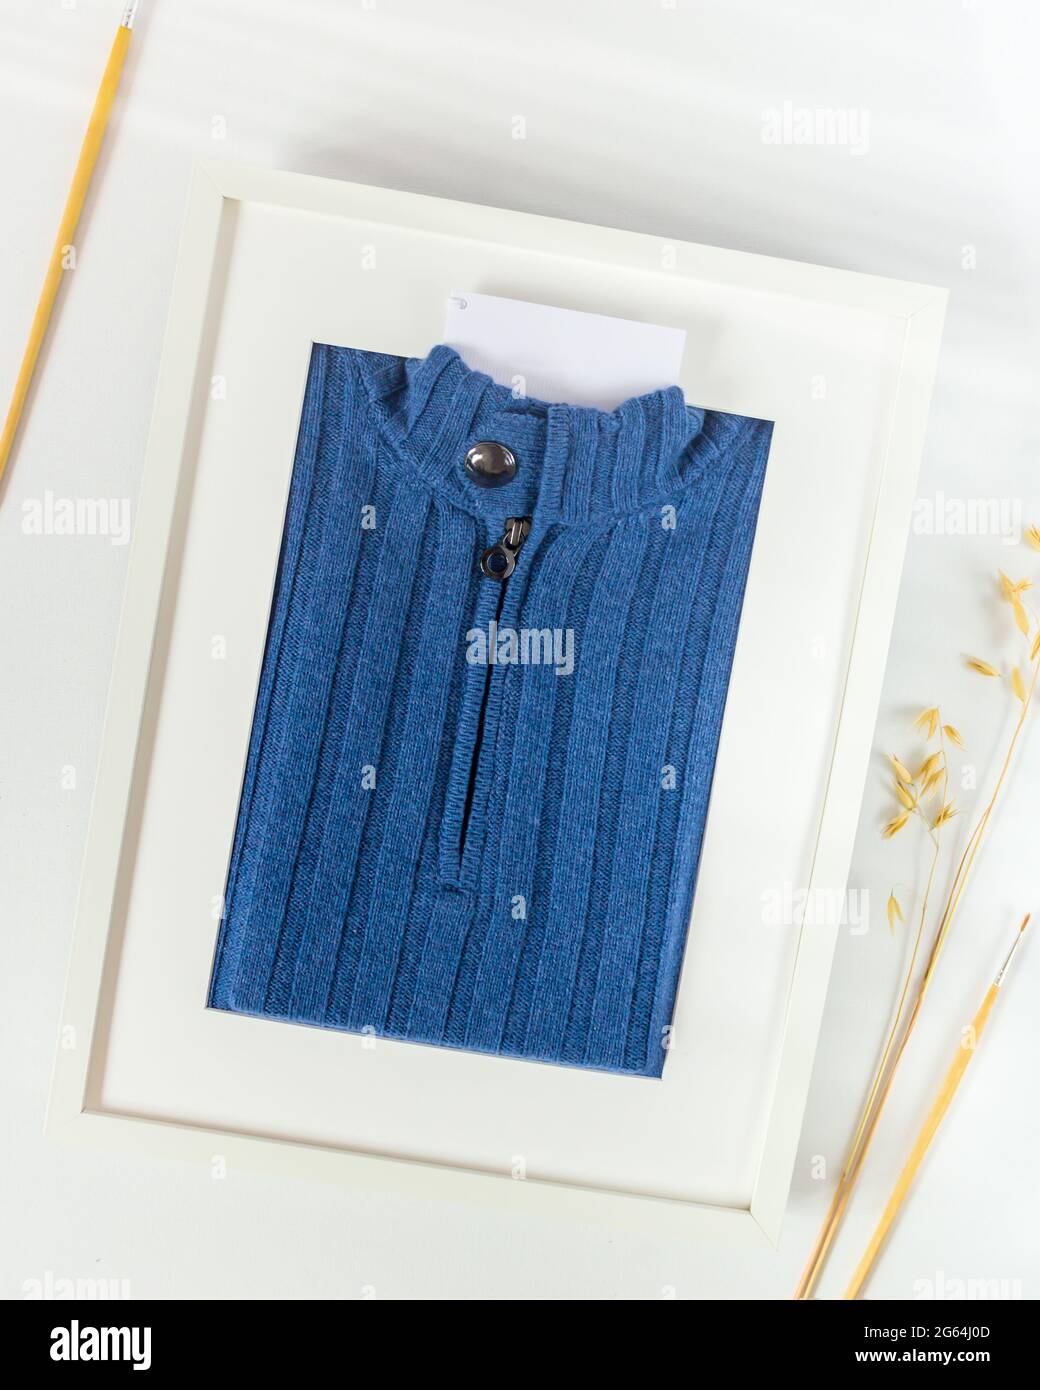 High quality, men's, knitted sweater made of expensive, natural fabric packed like a picture in a frame with a label for your brand. Clothes mockup Stock Photo